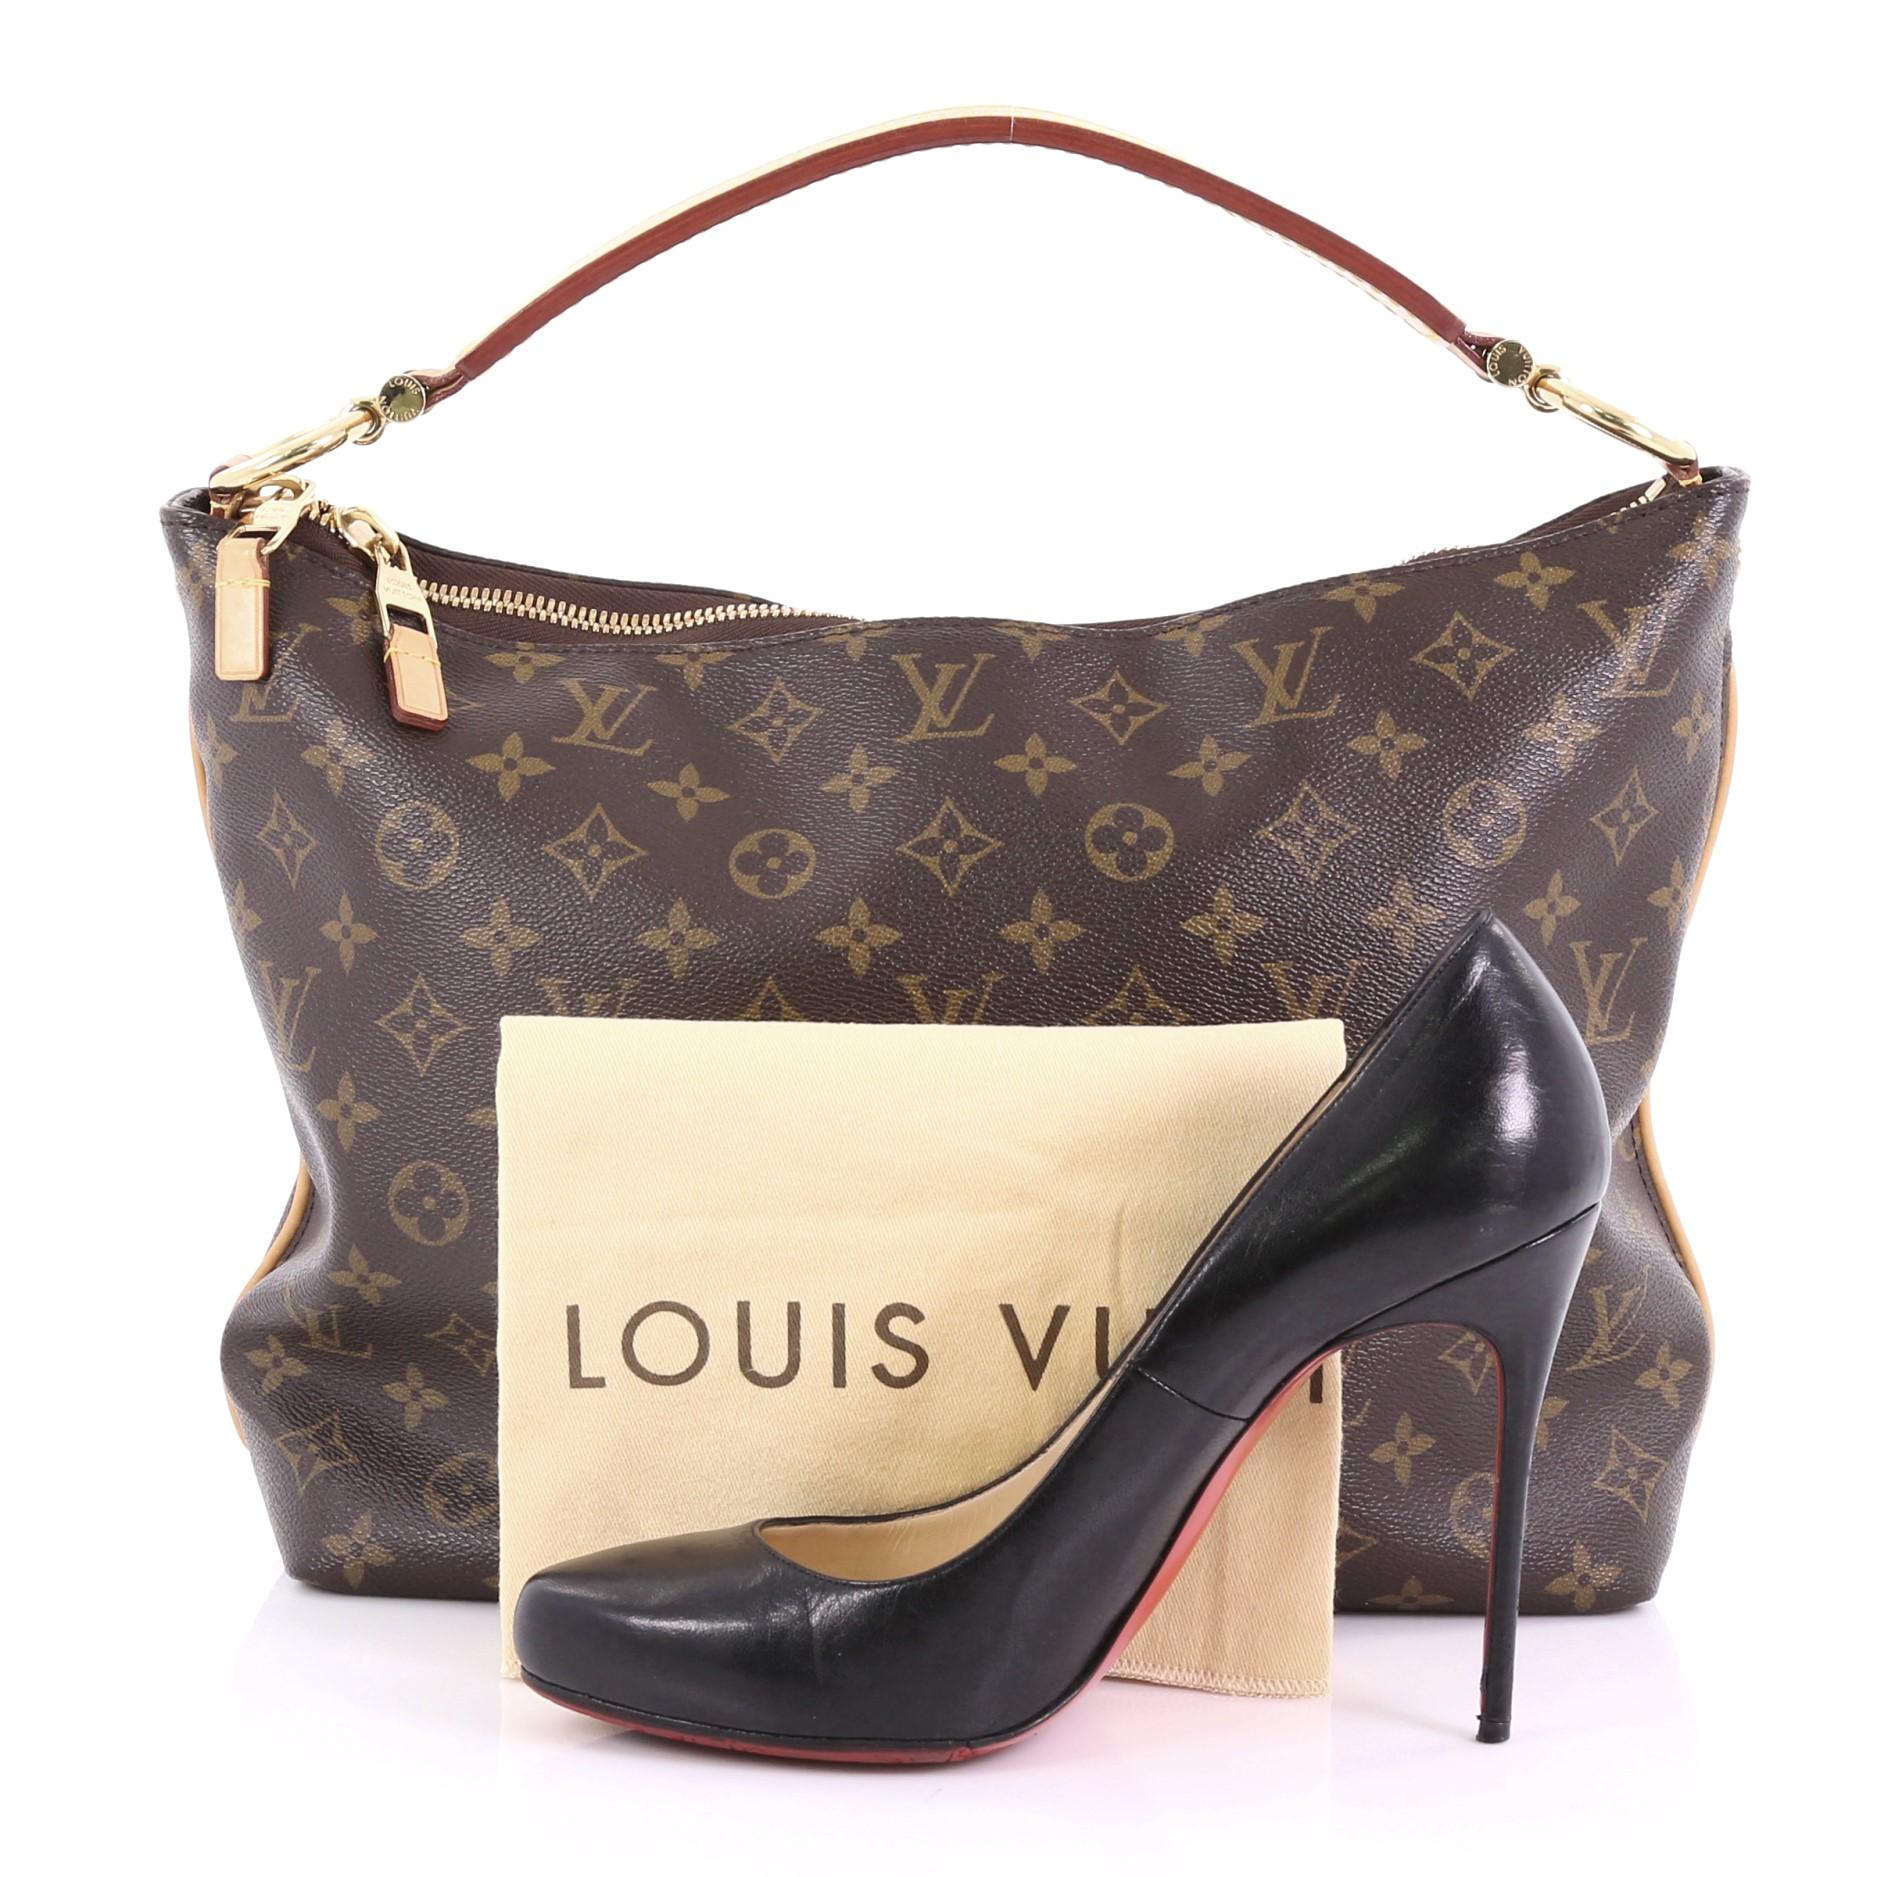 This Louis Vuitton Sully Handbag Monogram Canvas PM, crafted from brown monogram coated canvas, features a thick vachetta cowhide looped strap and gold-tone hardware. Its two-way top zip closure opens to a brown fabric interior with slip pockets.